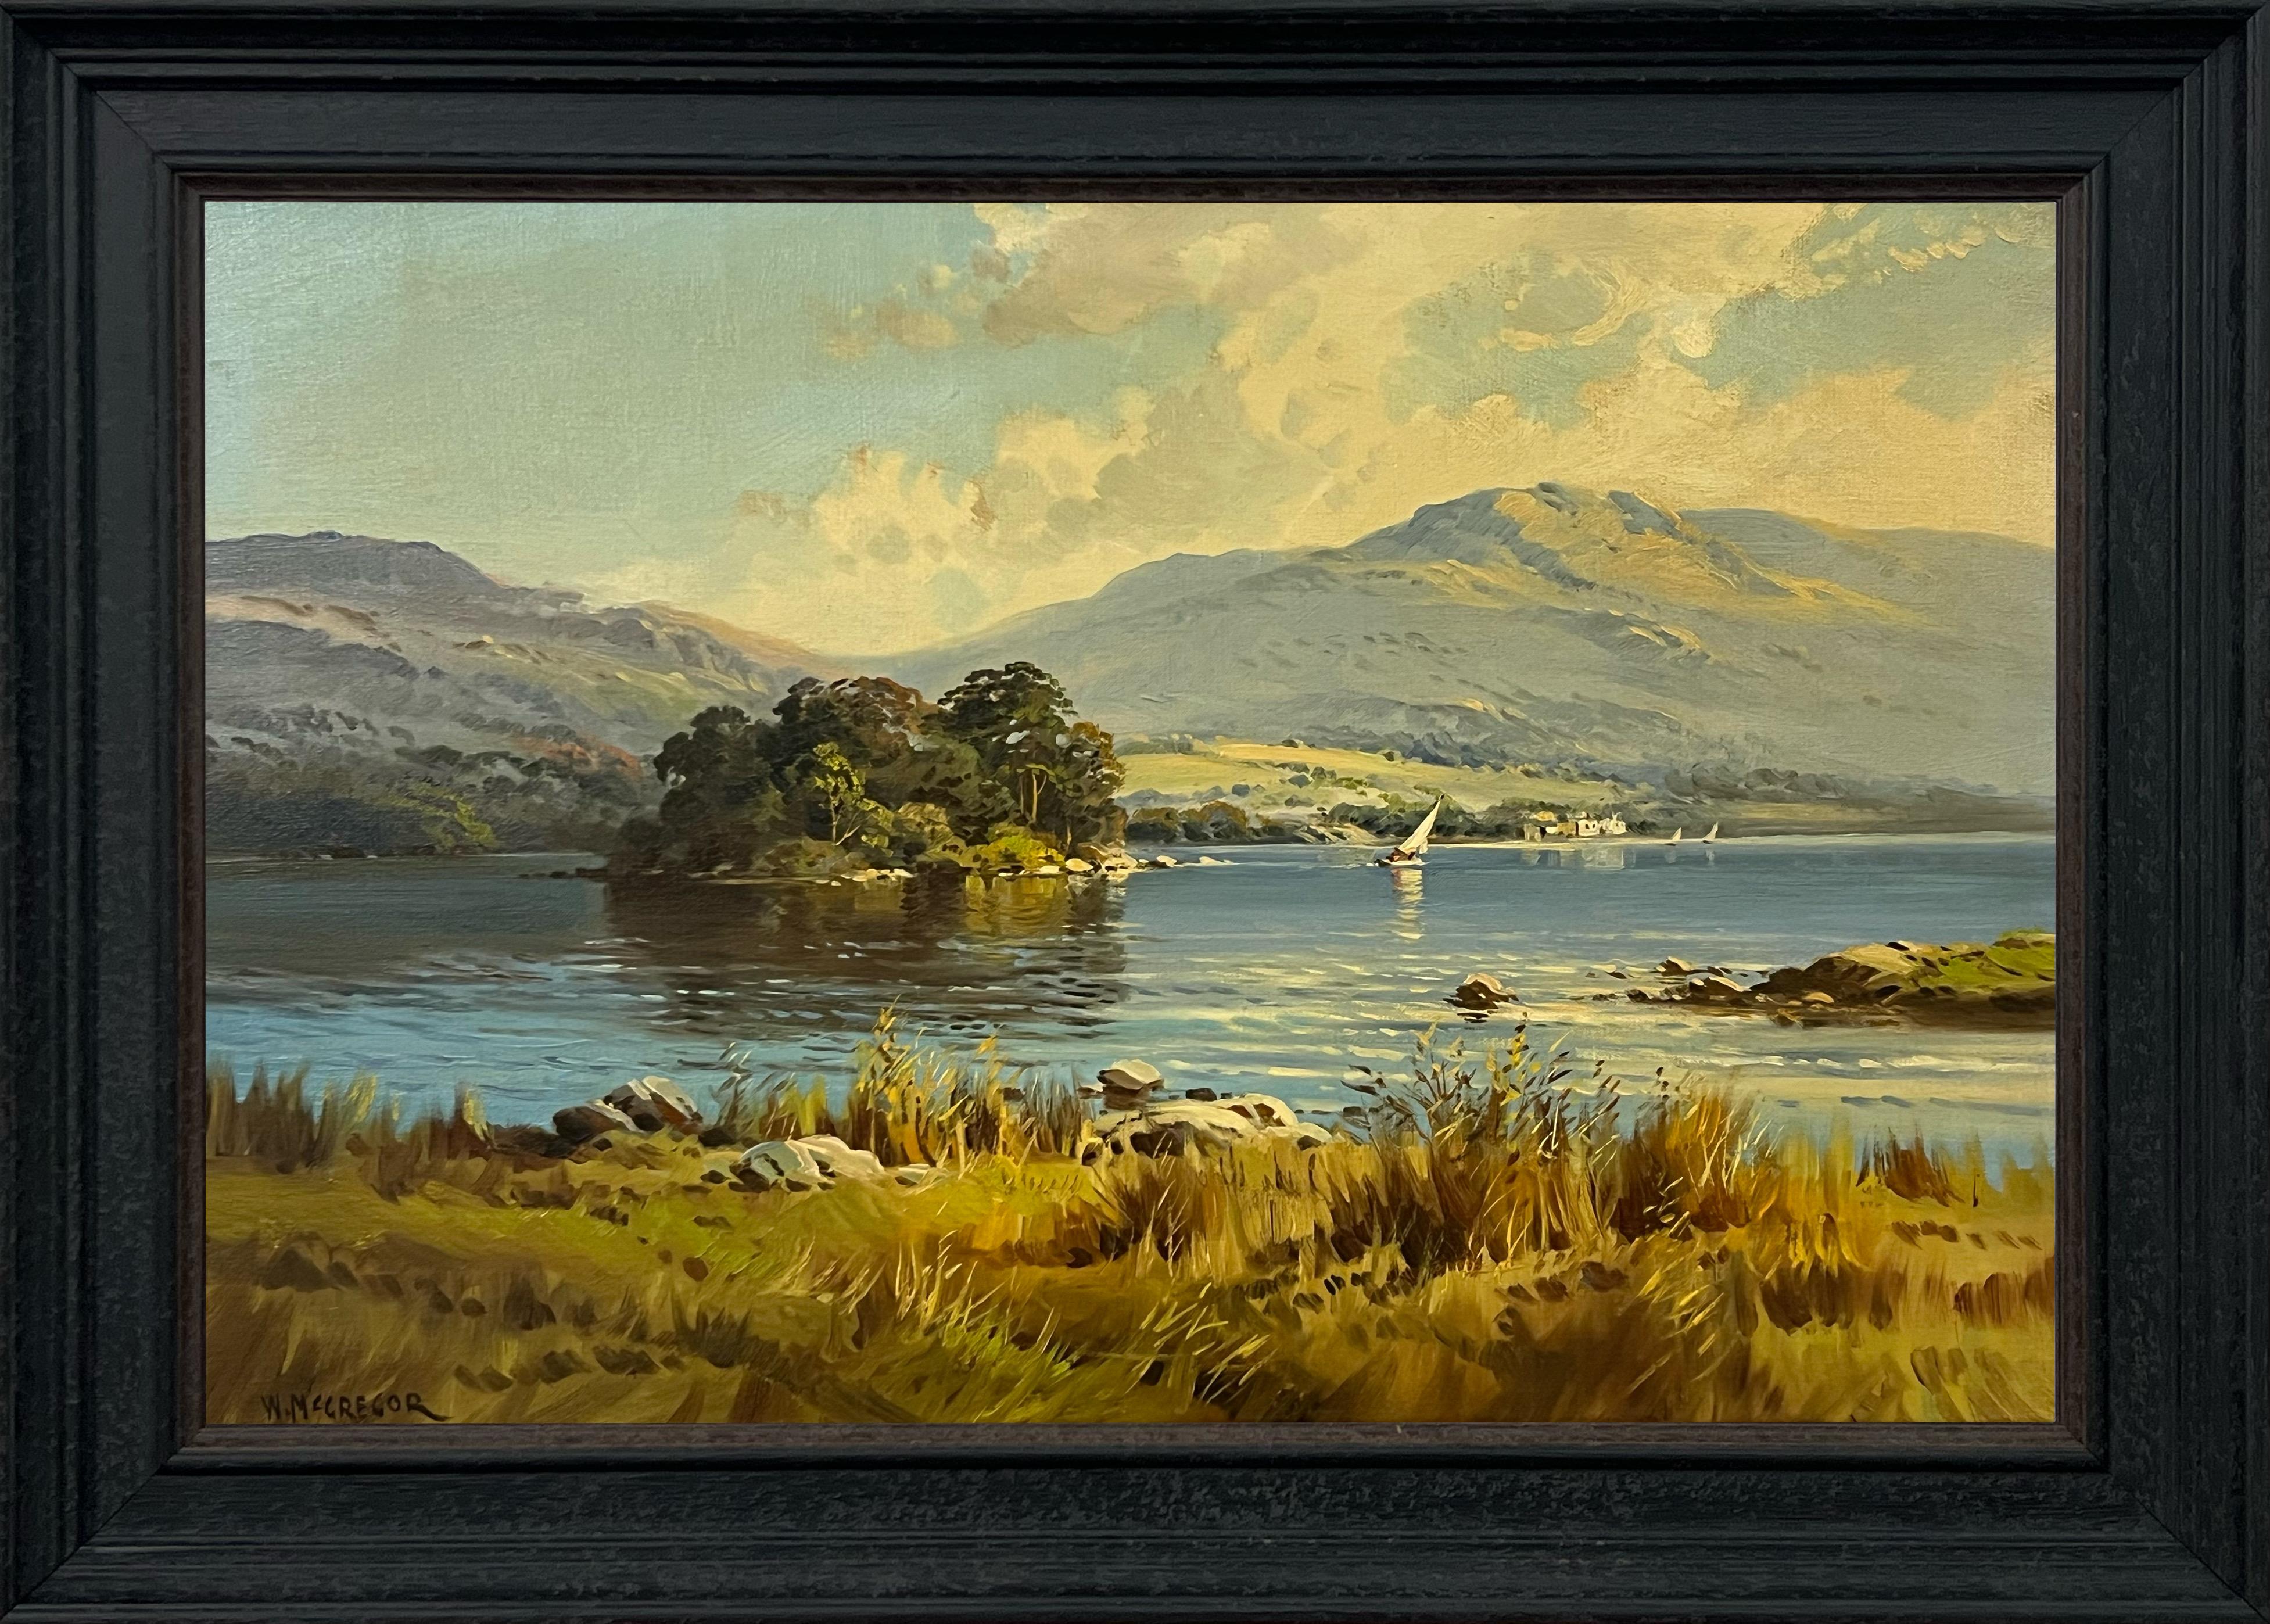 William McGregor Figurative Painting - Loch Lomond in Mountains of Scottish Highlands Realist Landscape Oil Painting